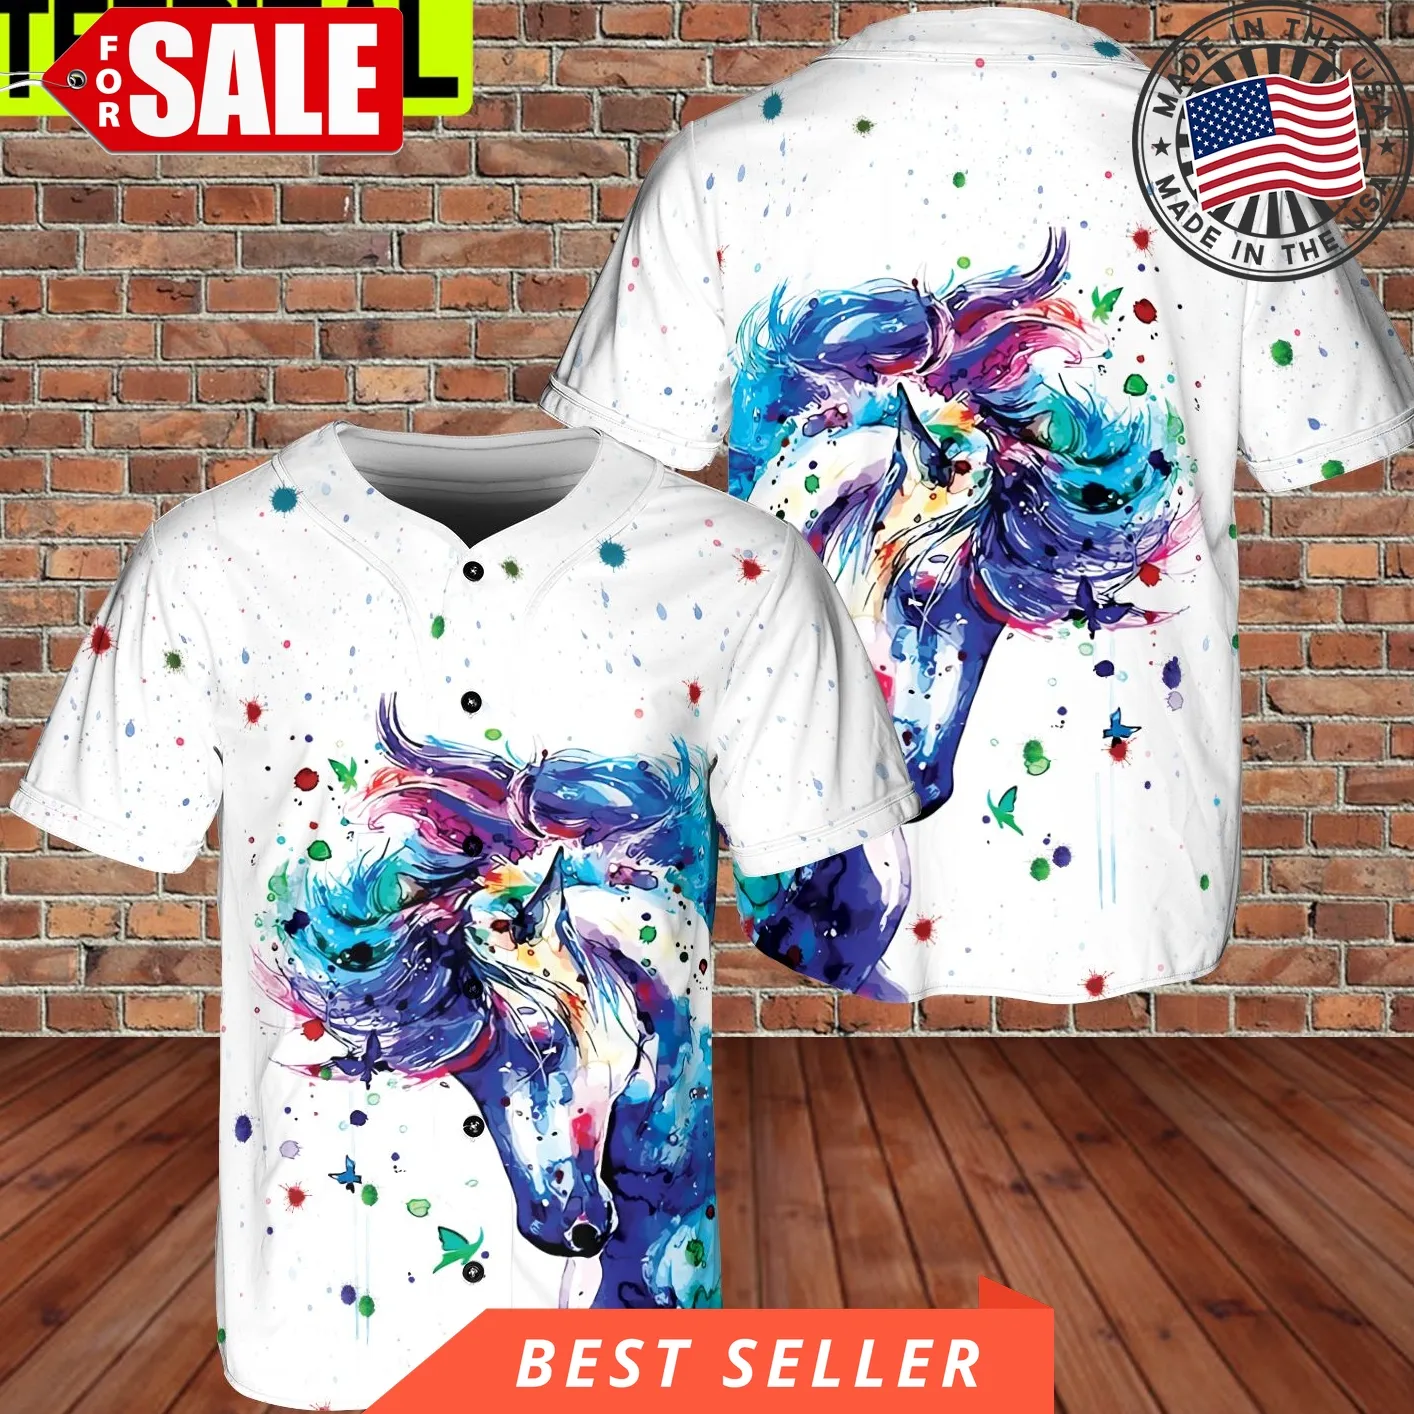 Fate Loves The Fearless Horse Colorful Lover Fabric Aop Baseball Jersey